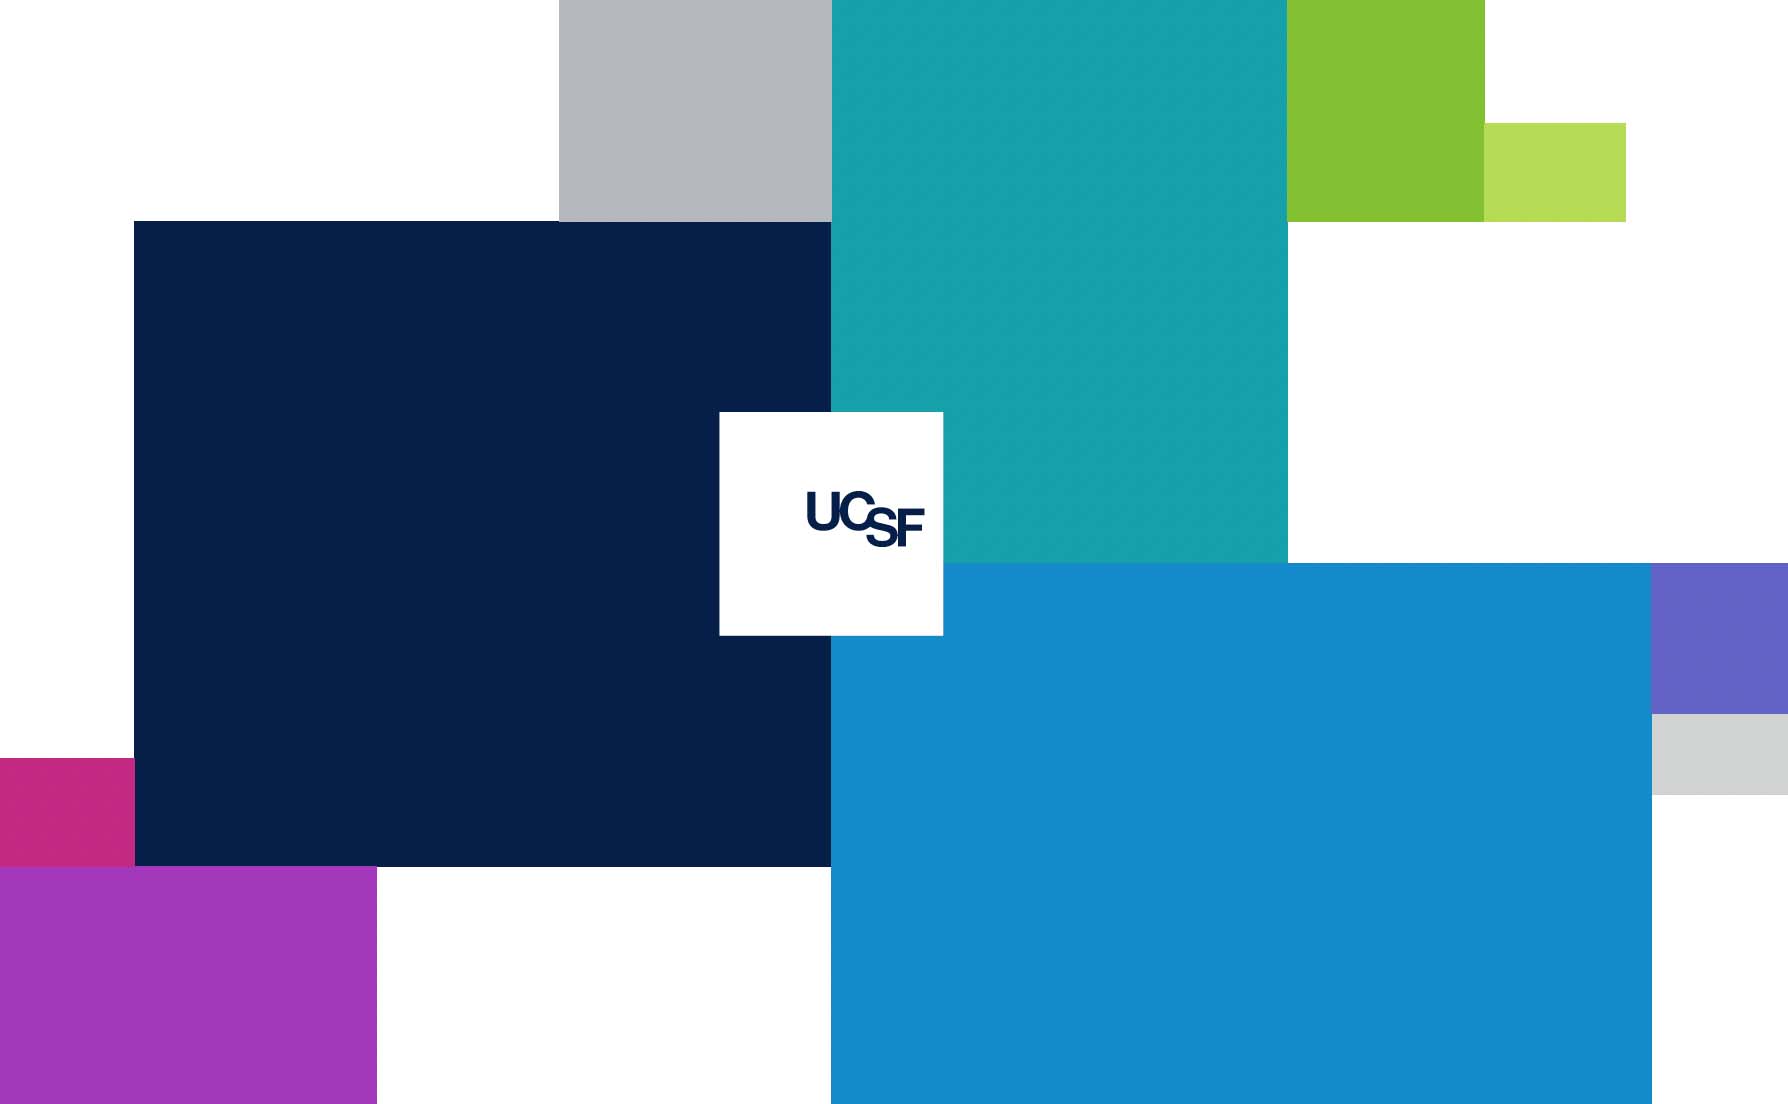 Grid of squares and rectangles in various colors with a white UCSF logo in the center